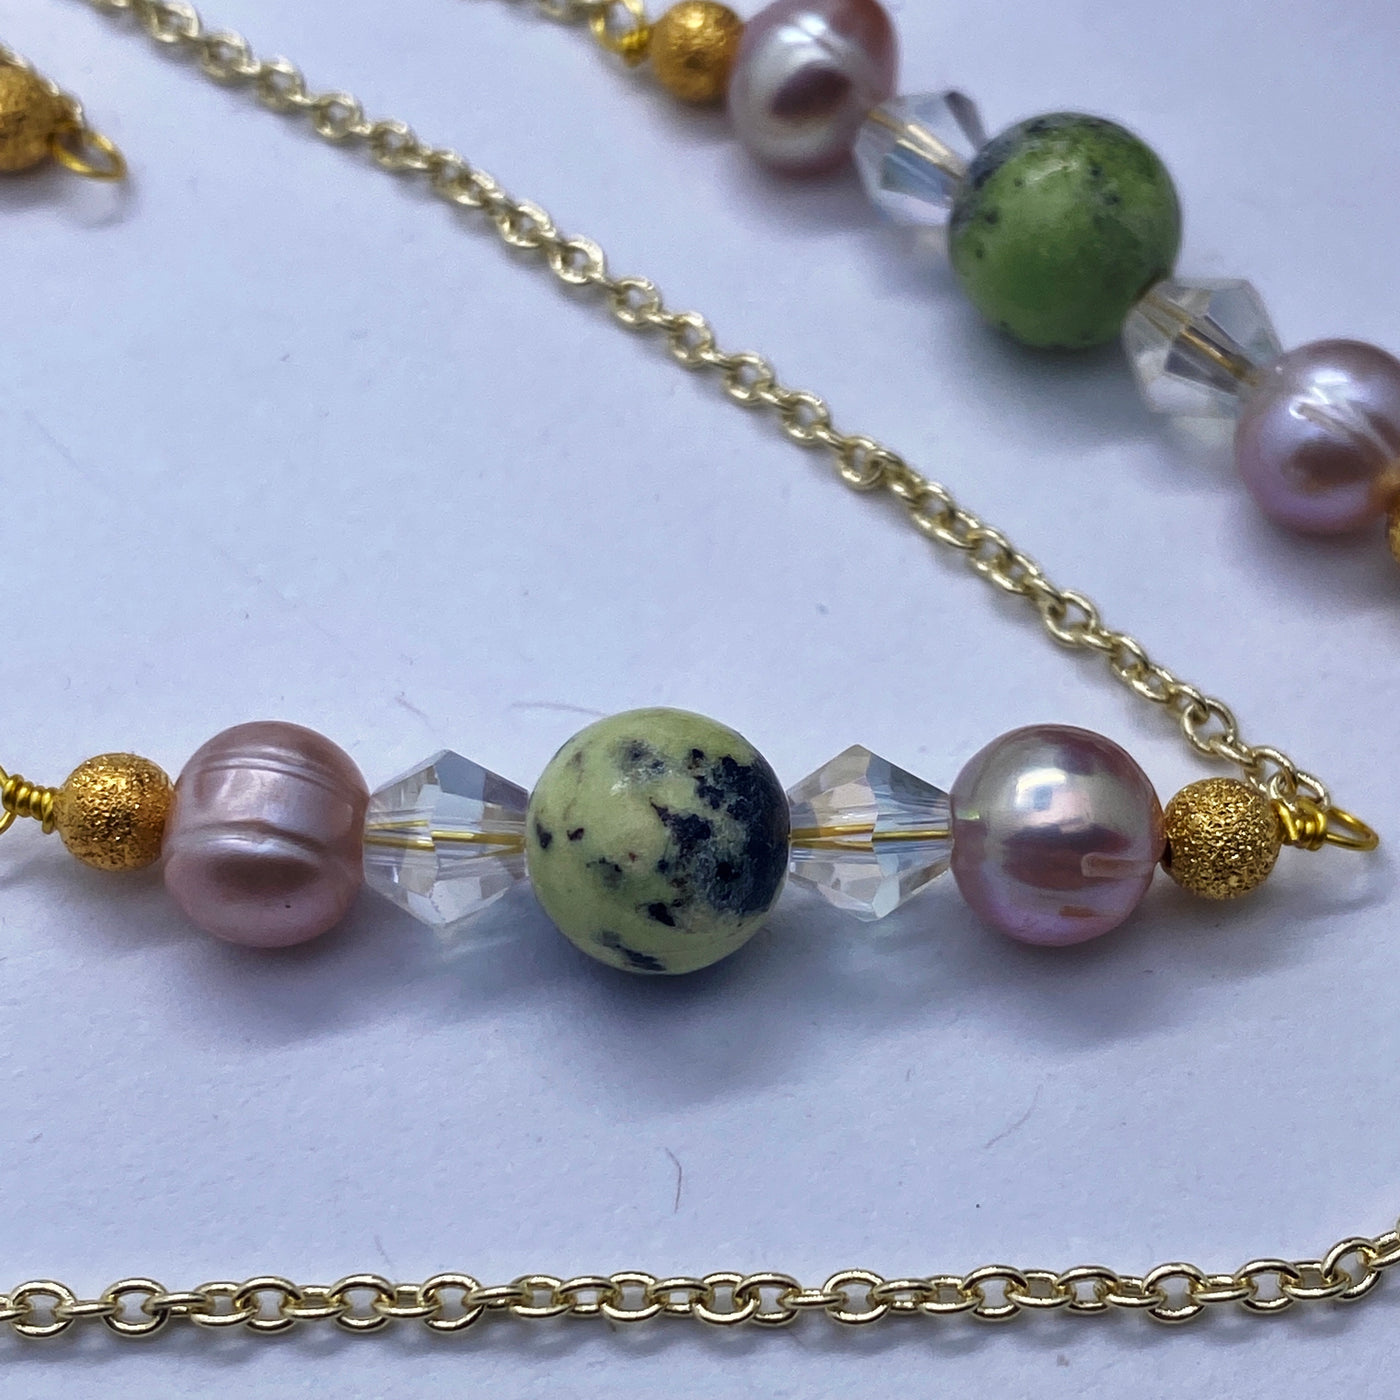 Yellow/green turquoise, freshwater pearls and crystals bycones on brass chain